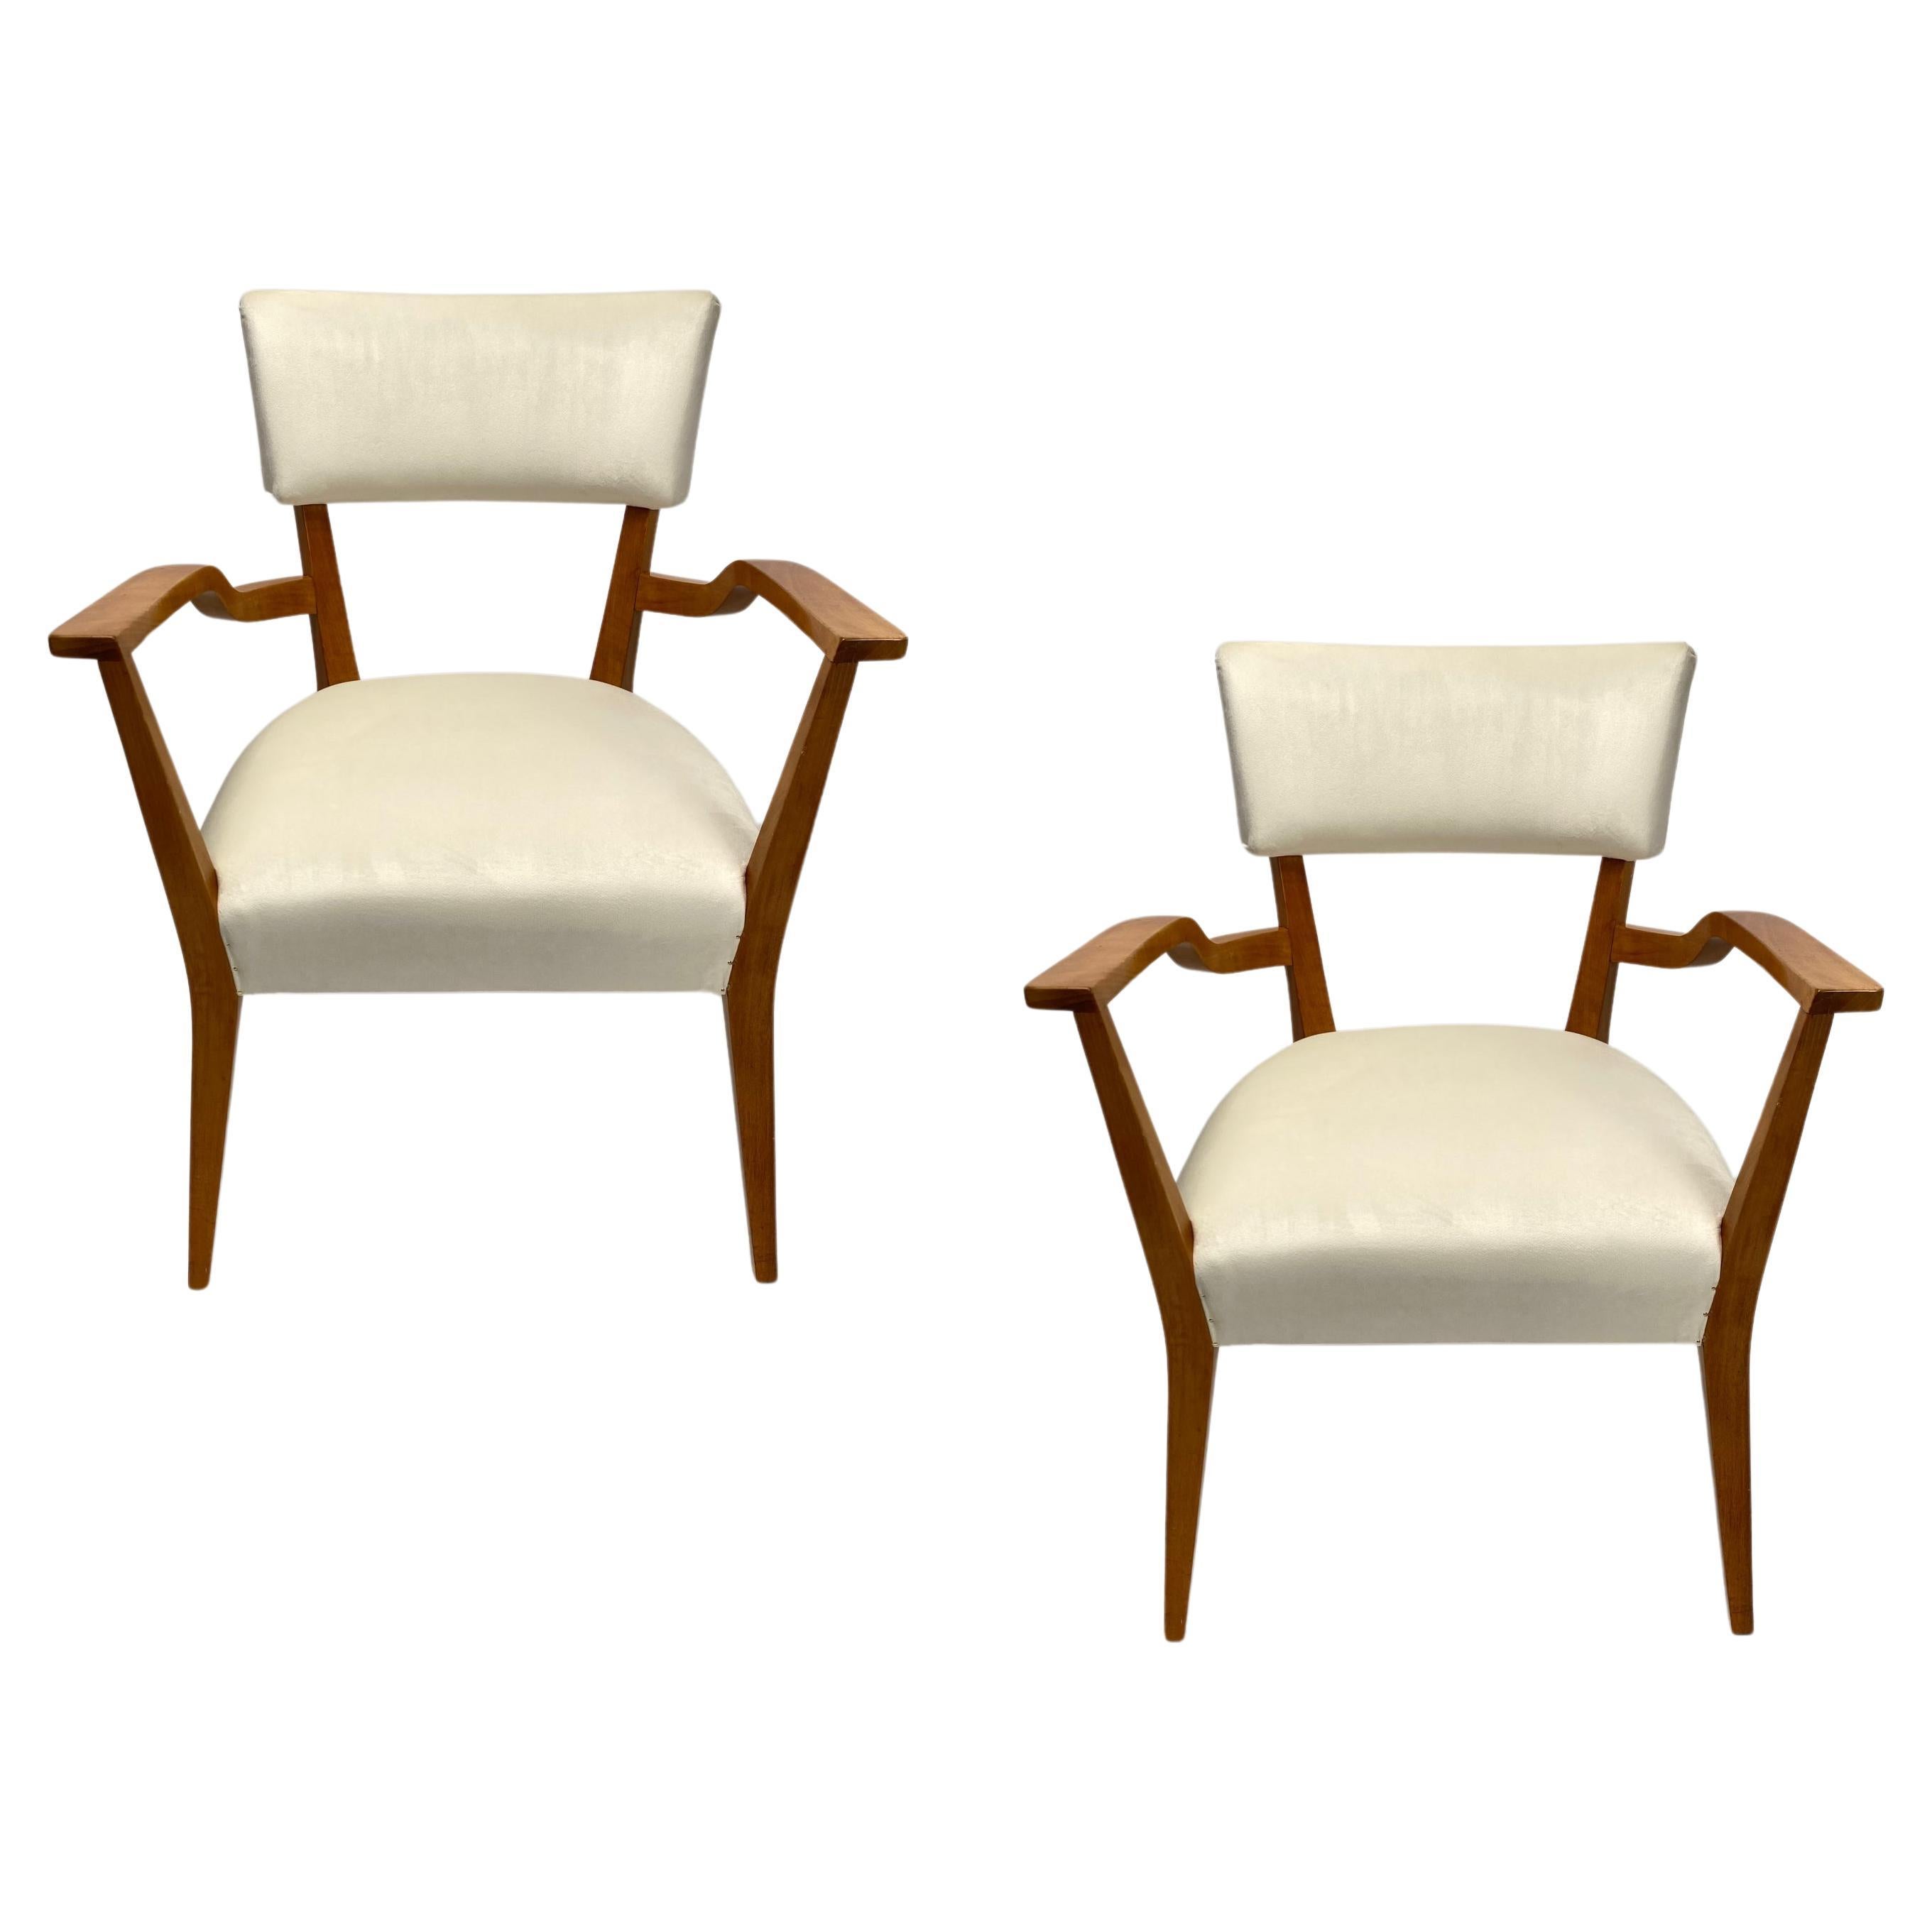 Pair of Mid-Century Organic Armchairs, Gio Ponti Style, velvet and wood, 1950s For Sale